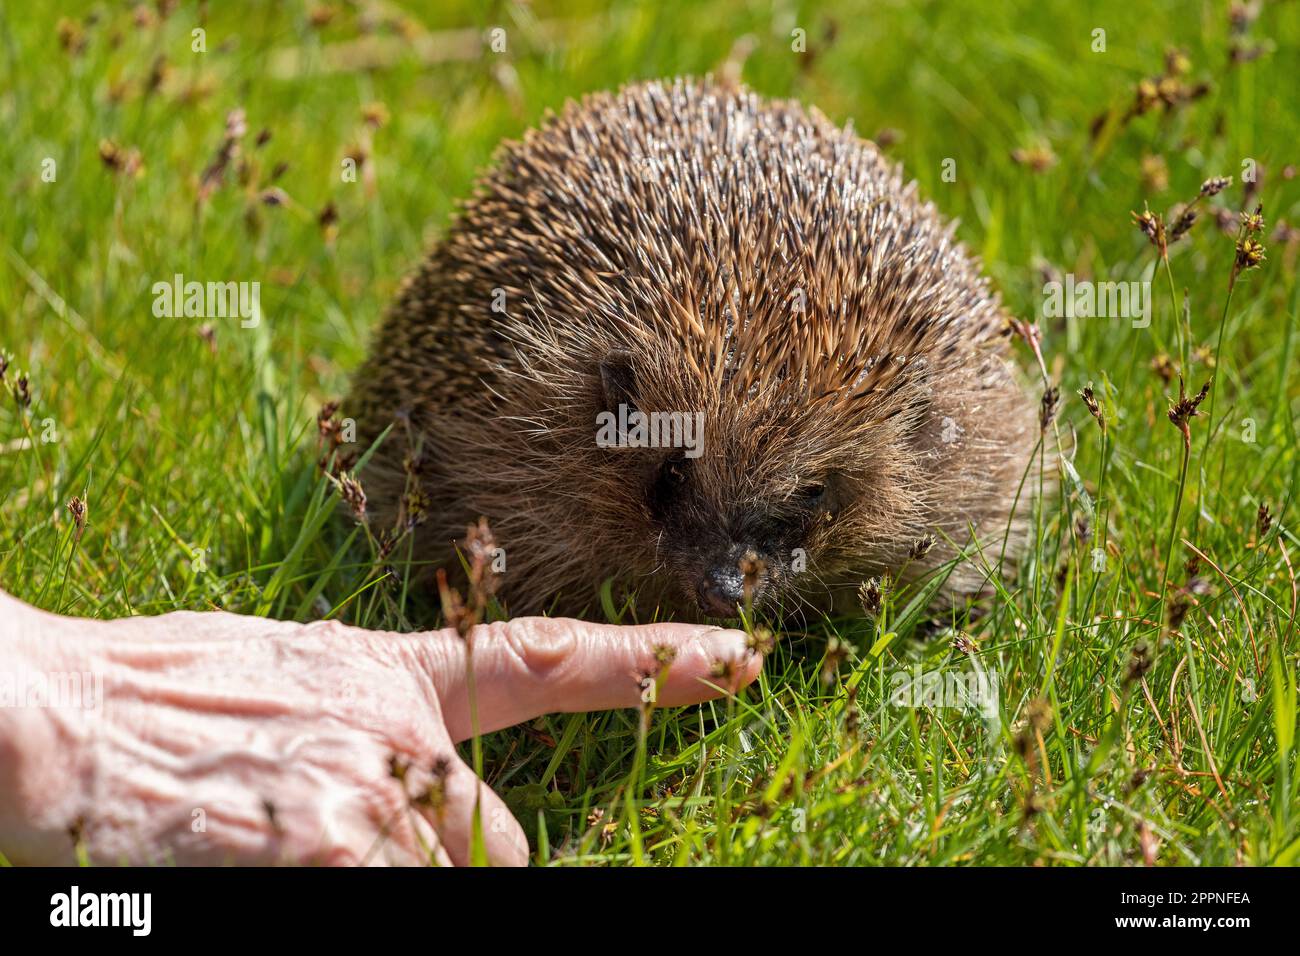 Hedgehog (Erinaceidae) taking a smell at a woman´s finger, Krummsee, Malente, Schleswig-Holstein, Germany Stock Photo